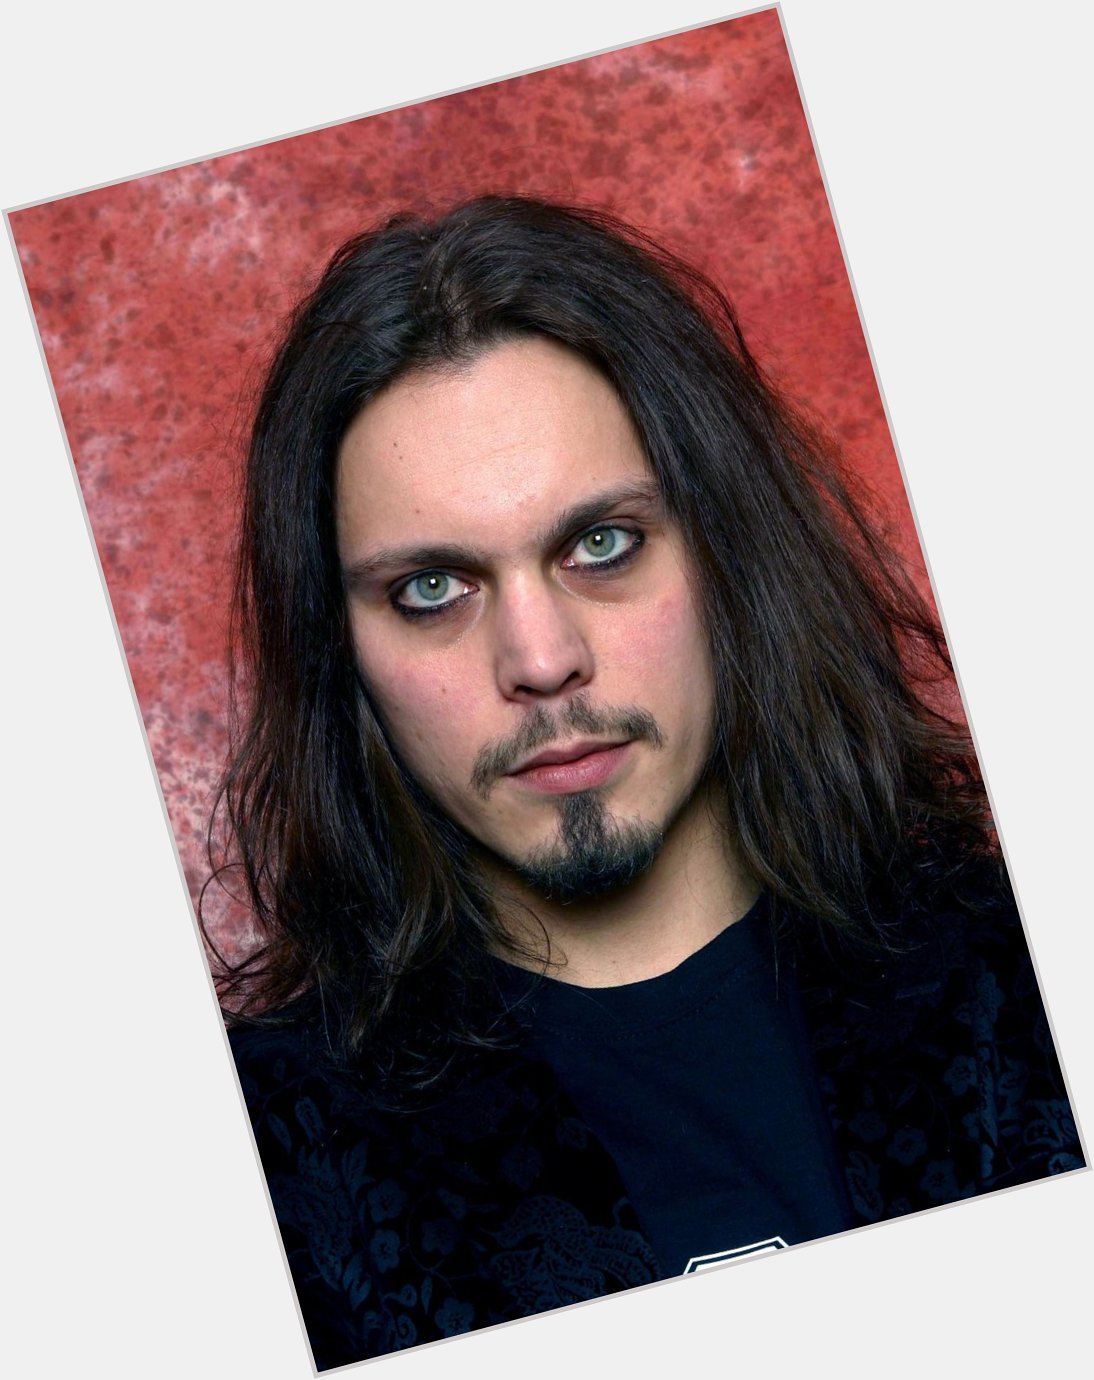 Happy 44th birthday to the love of my life and the biggest inspiration in this past 20 Years, Ville Valo 